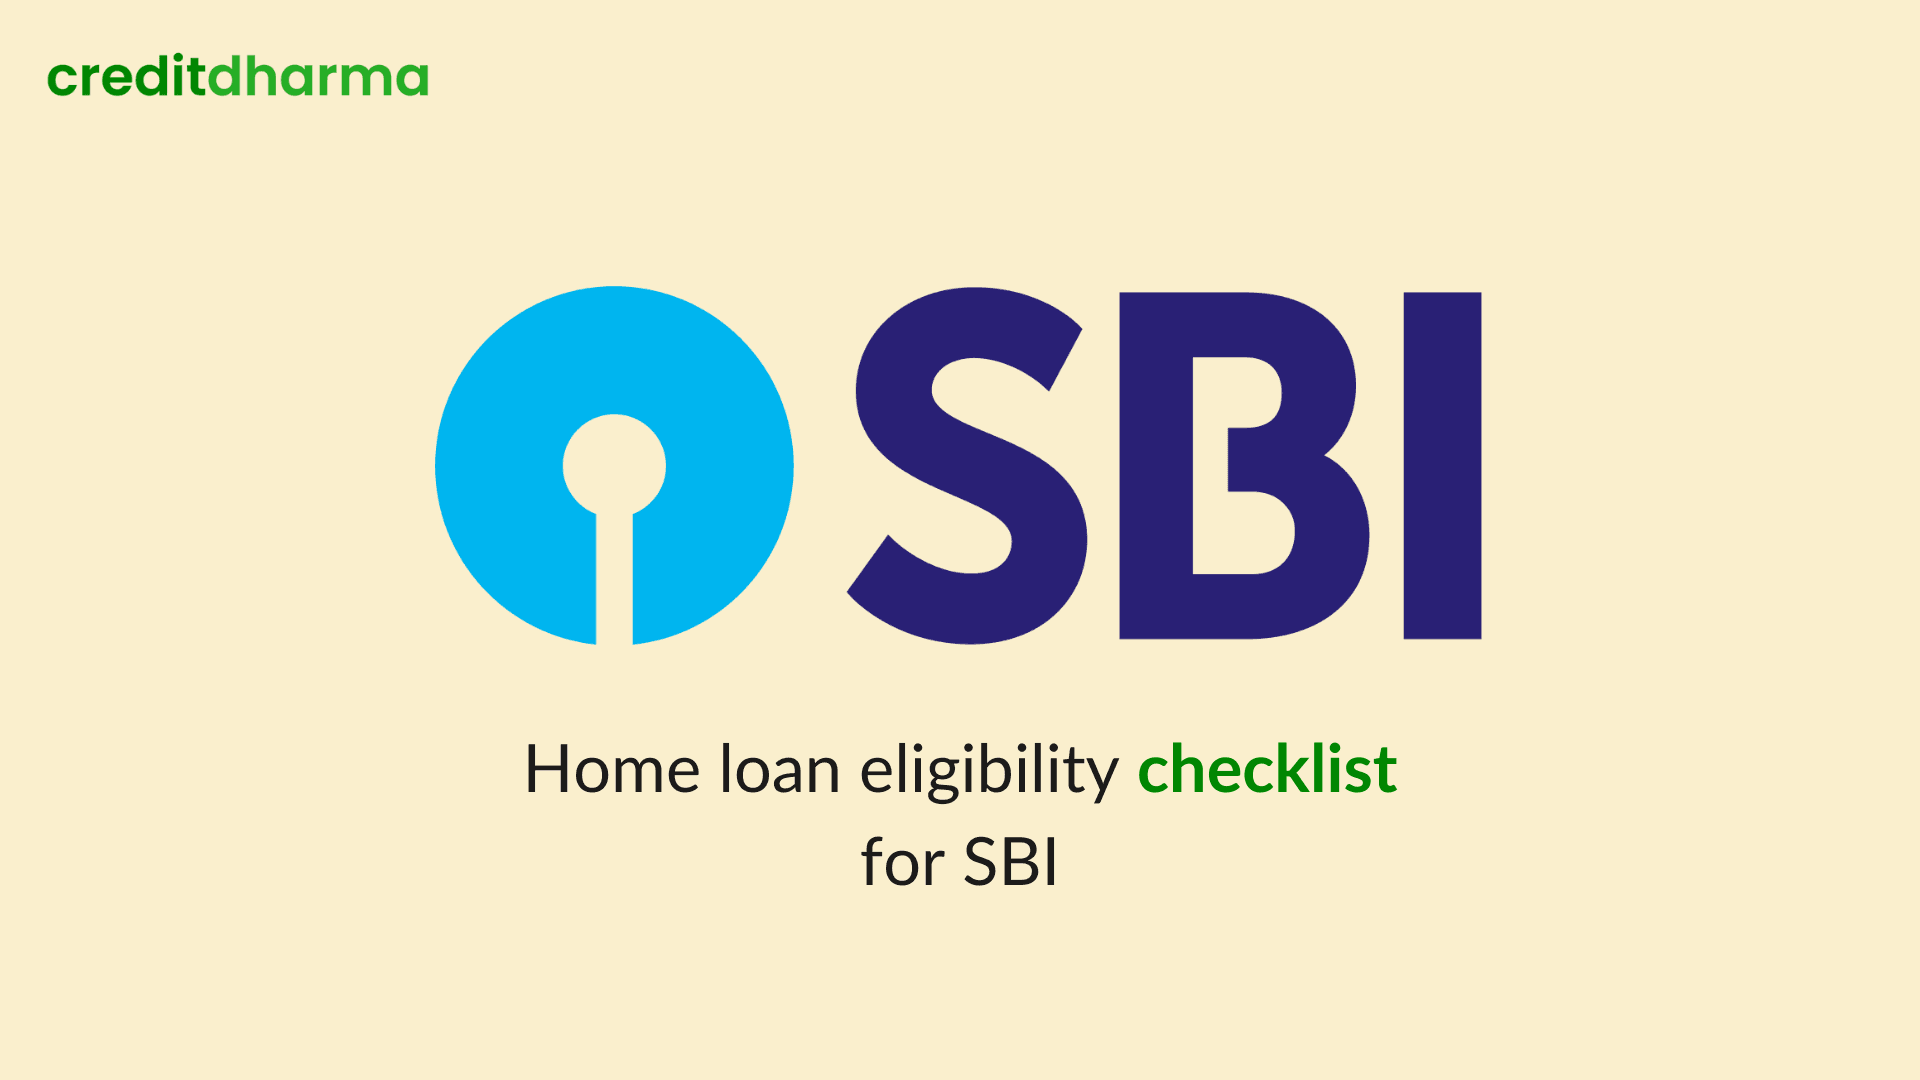 Cover Image for Home loan eligibility checklist for SBI